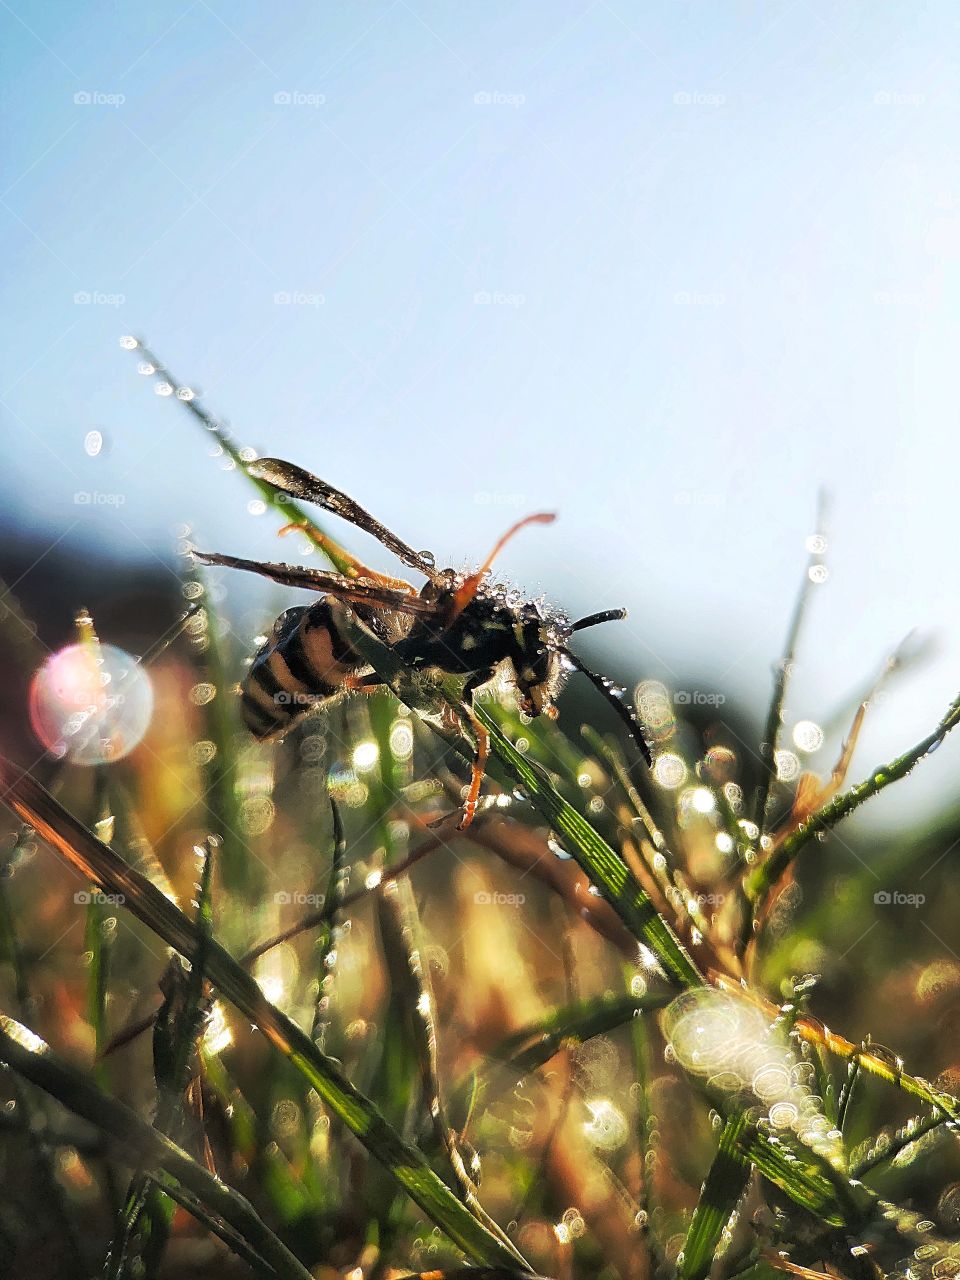 A close up of a bee on a grass